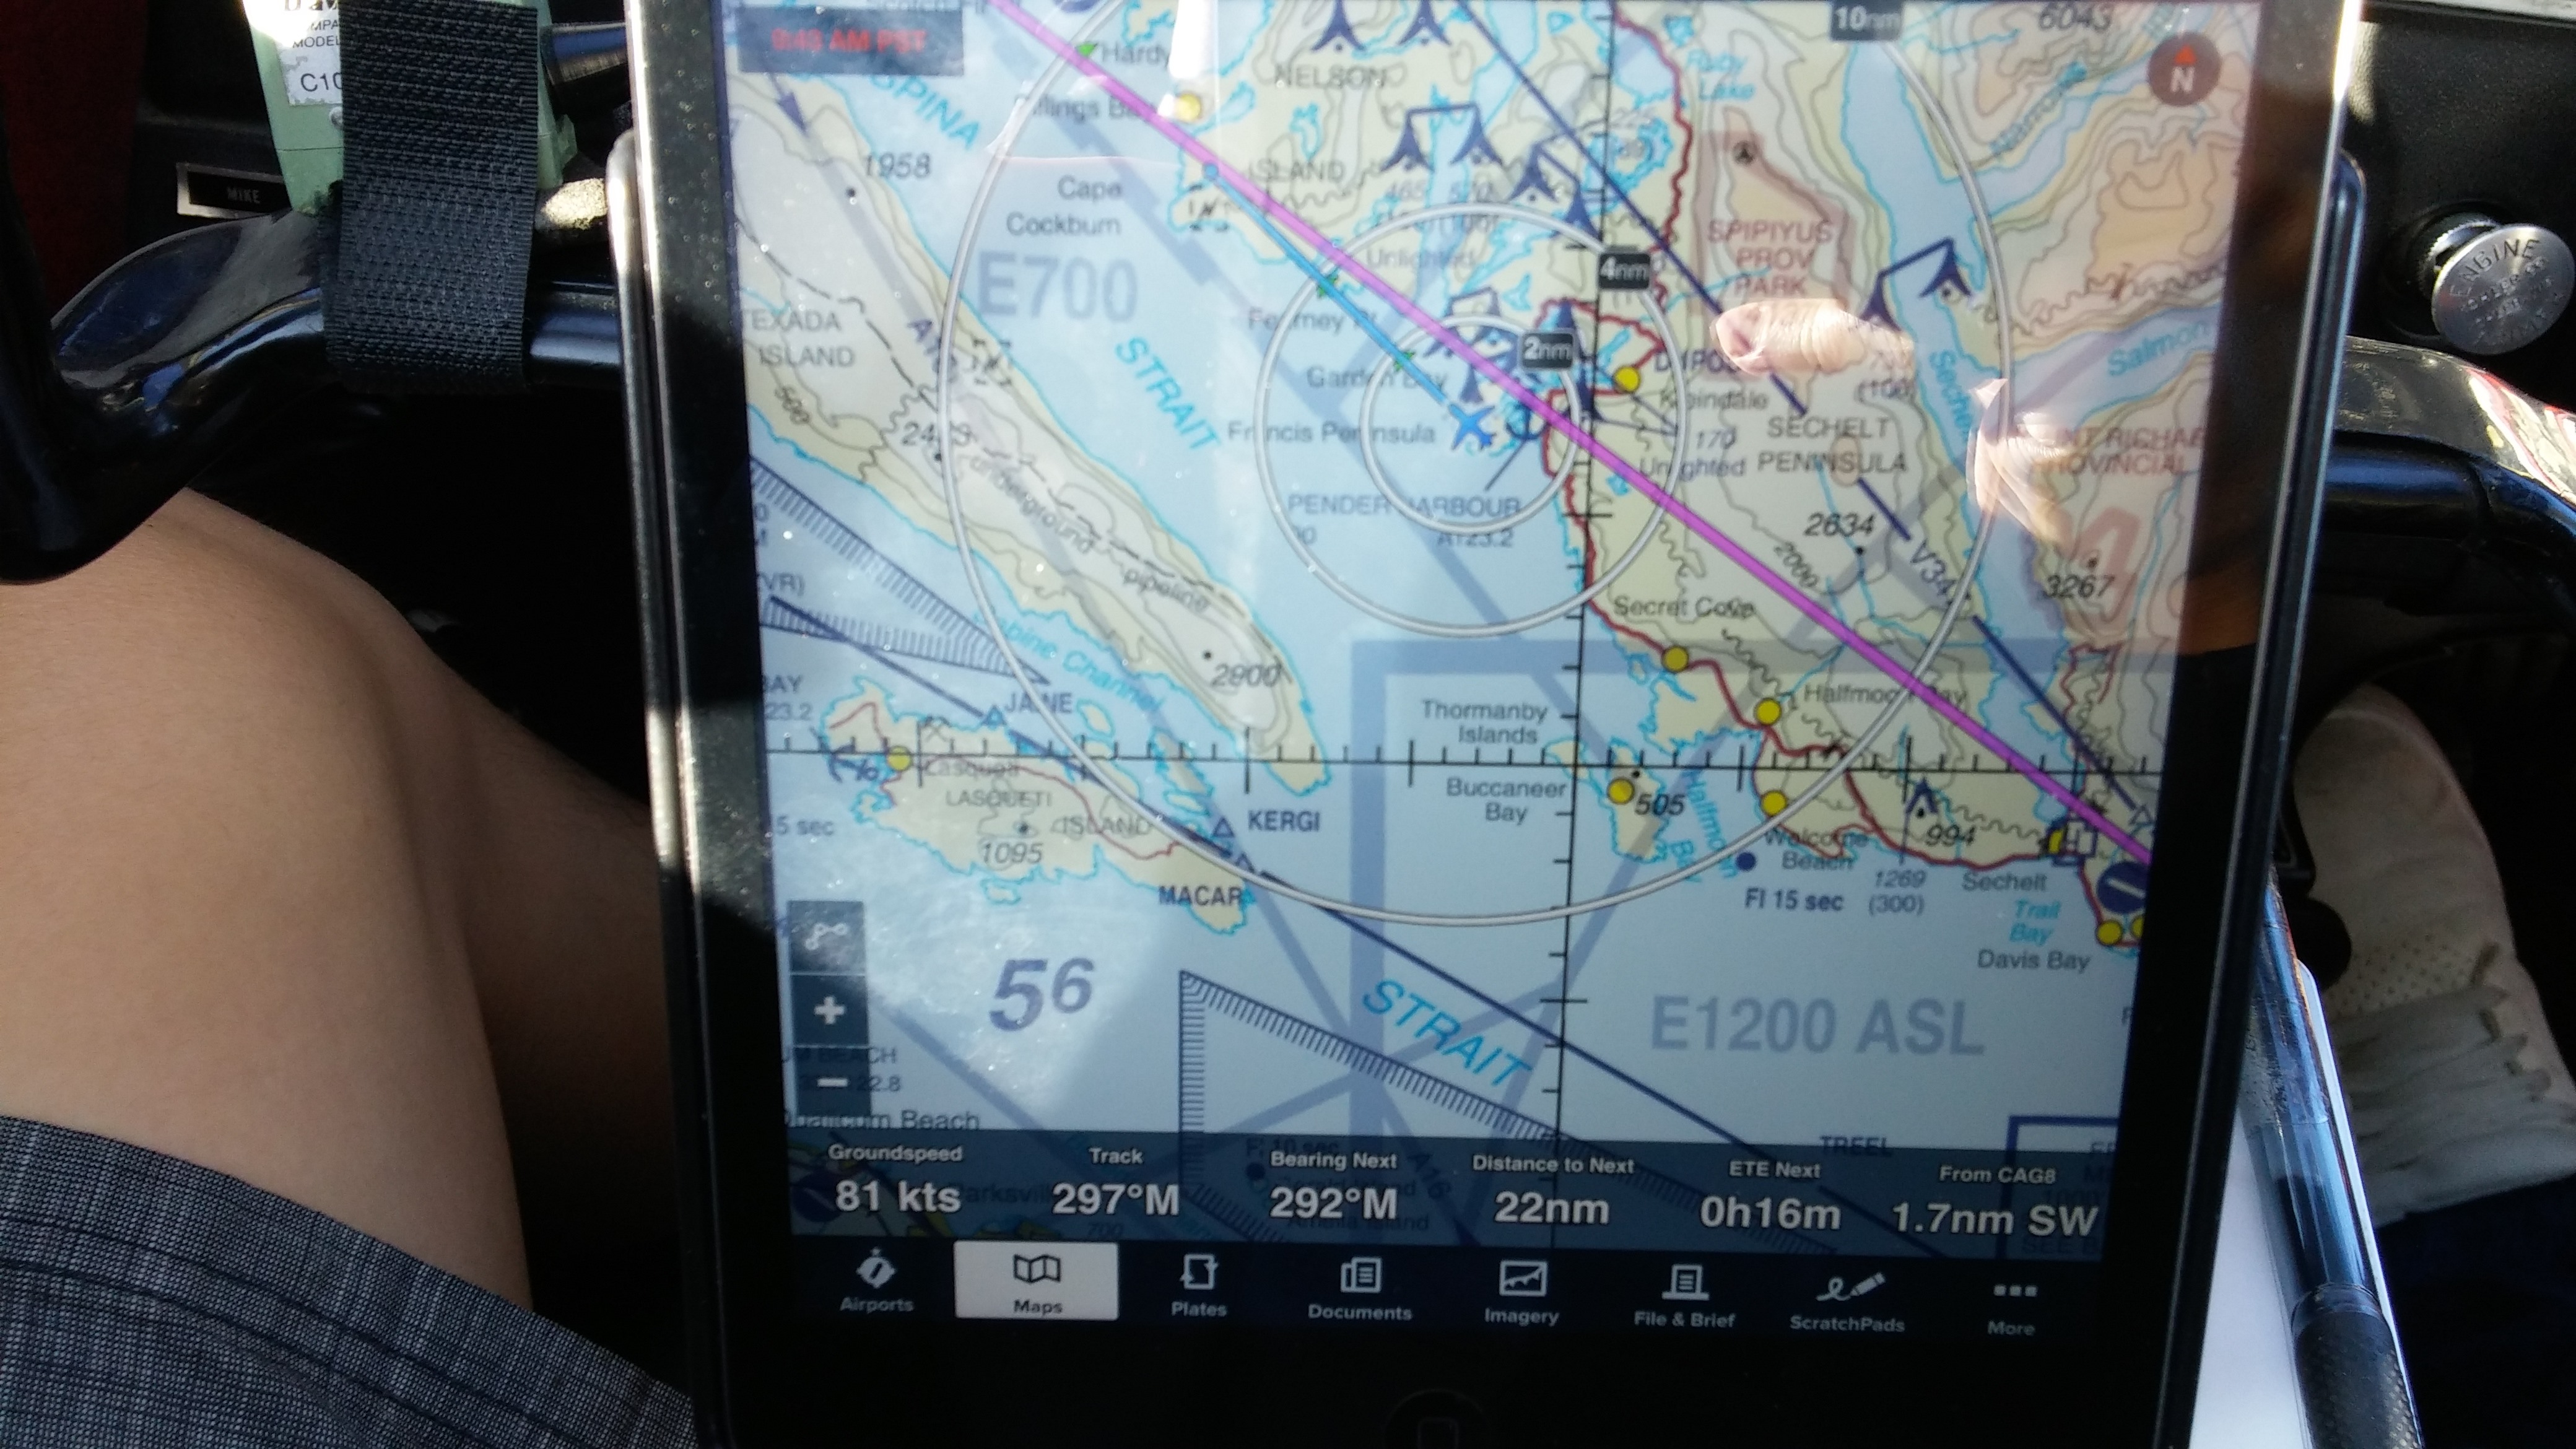 That headwind! Doing 105 knots indicated